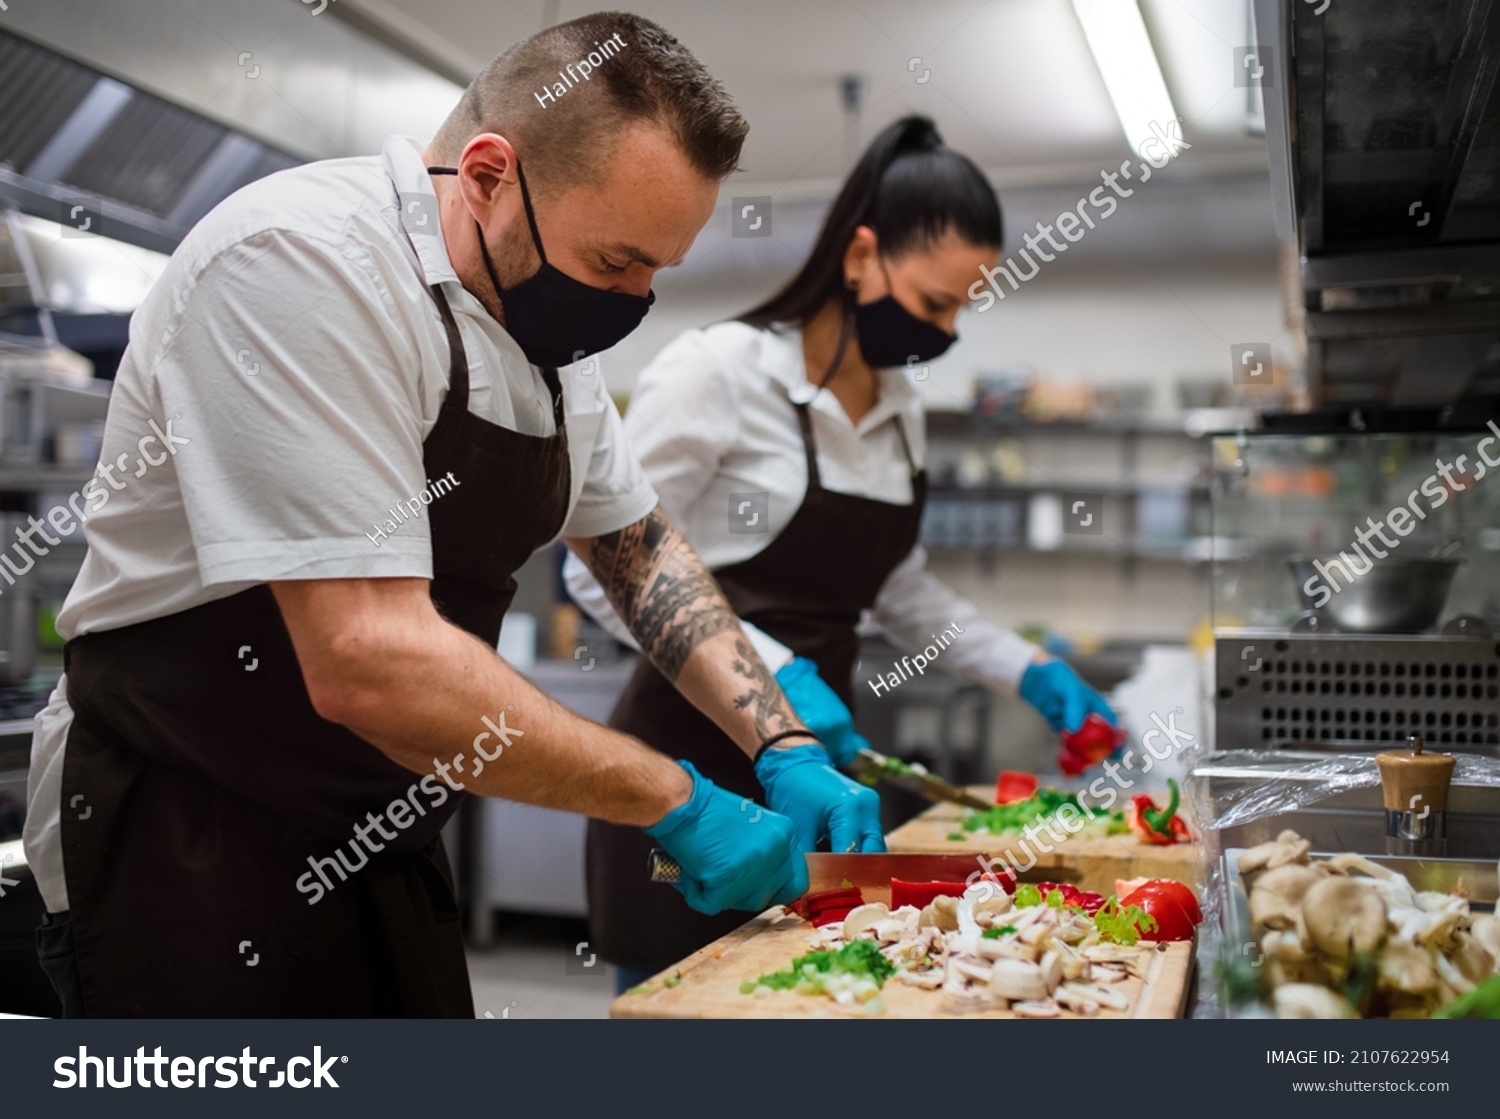 Chef and cook with face masks cutting vegetables indoors in restaurant kitchen, coronavirus concept. #2107622954